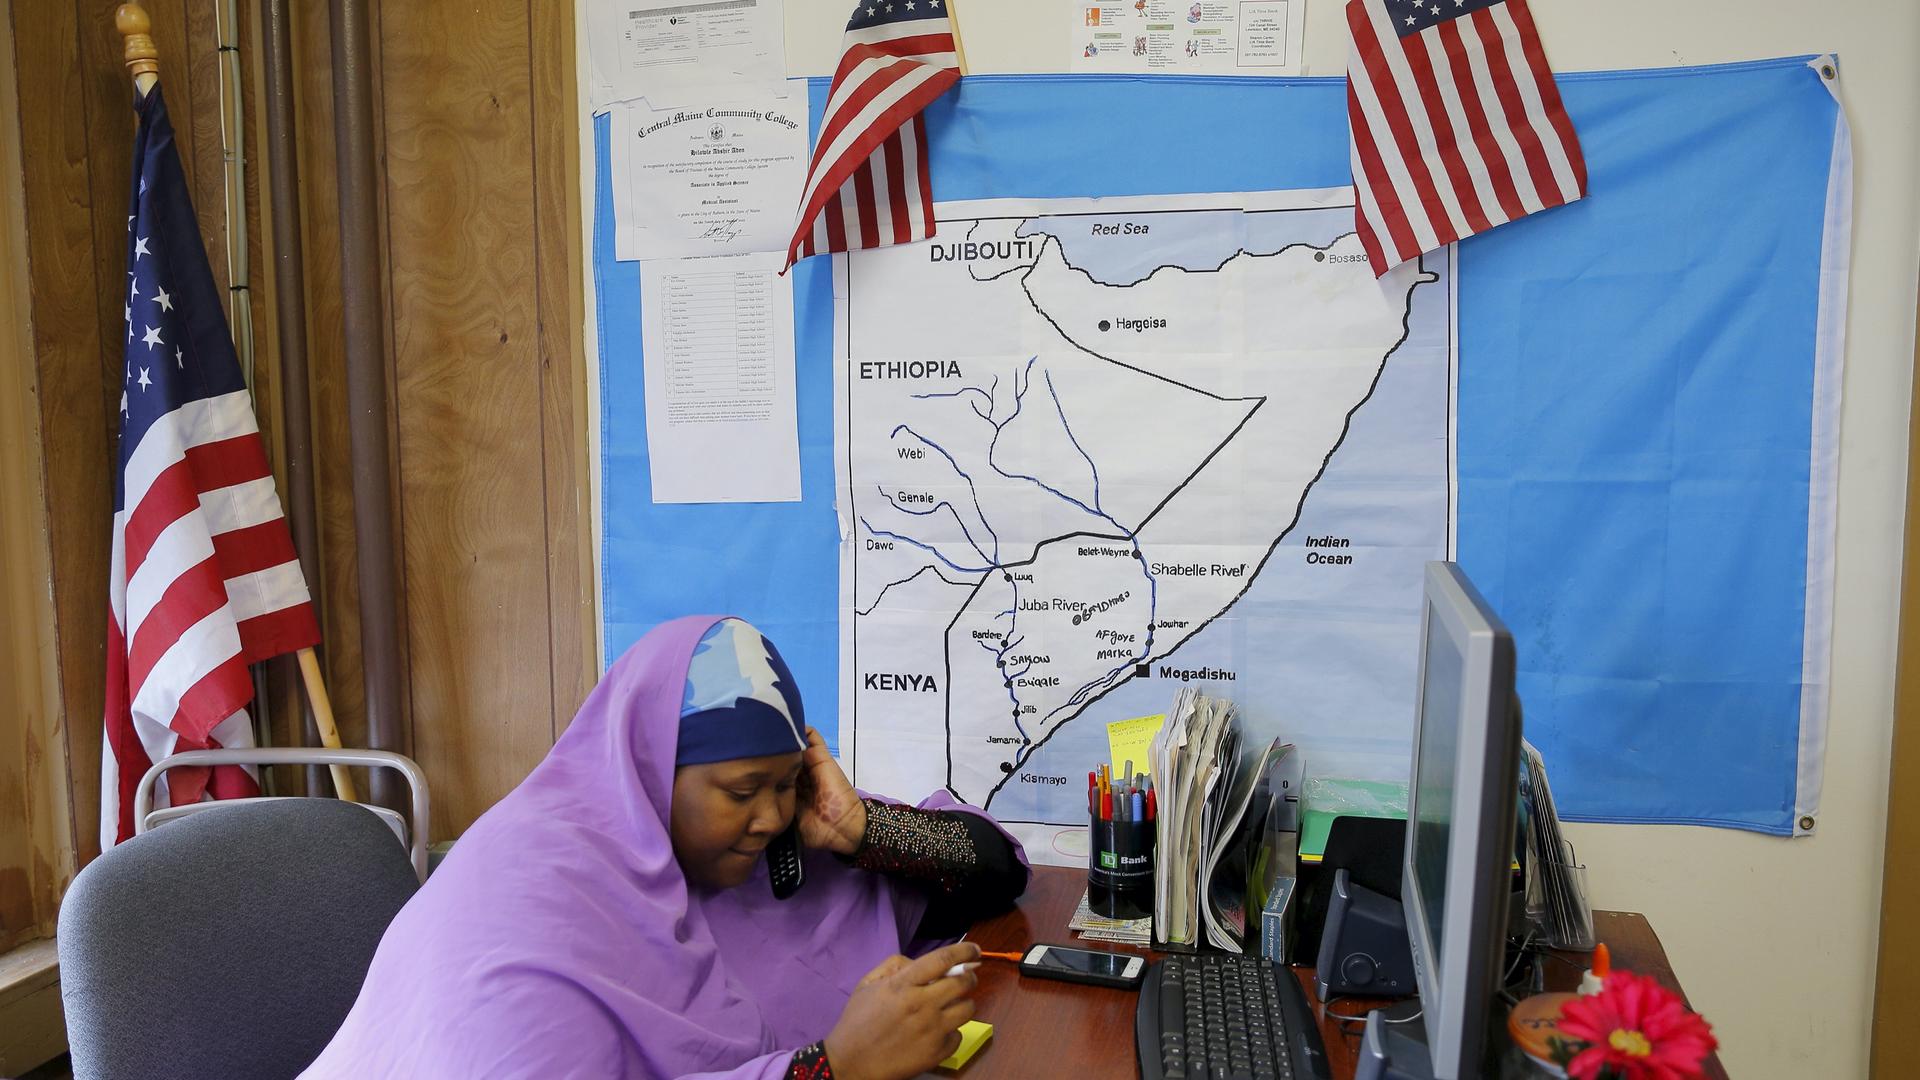 A Somali woman wearing a purple headscarf answers the phone in an office with American flags and East Africa map on the wall.